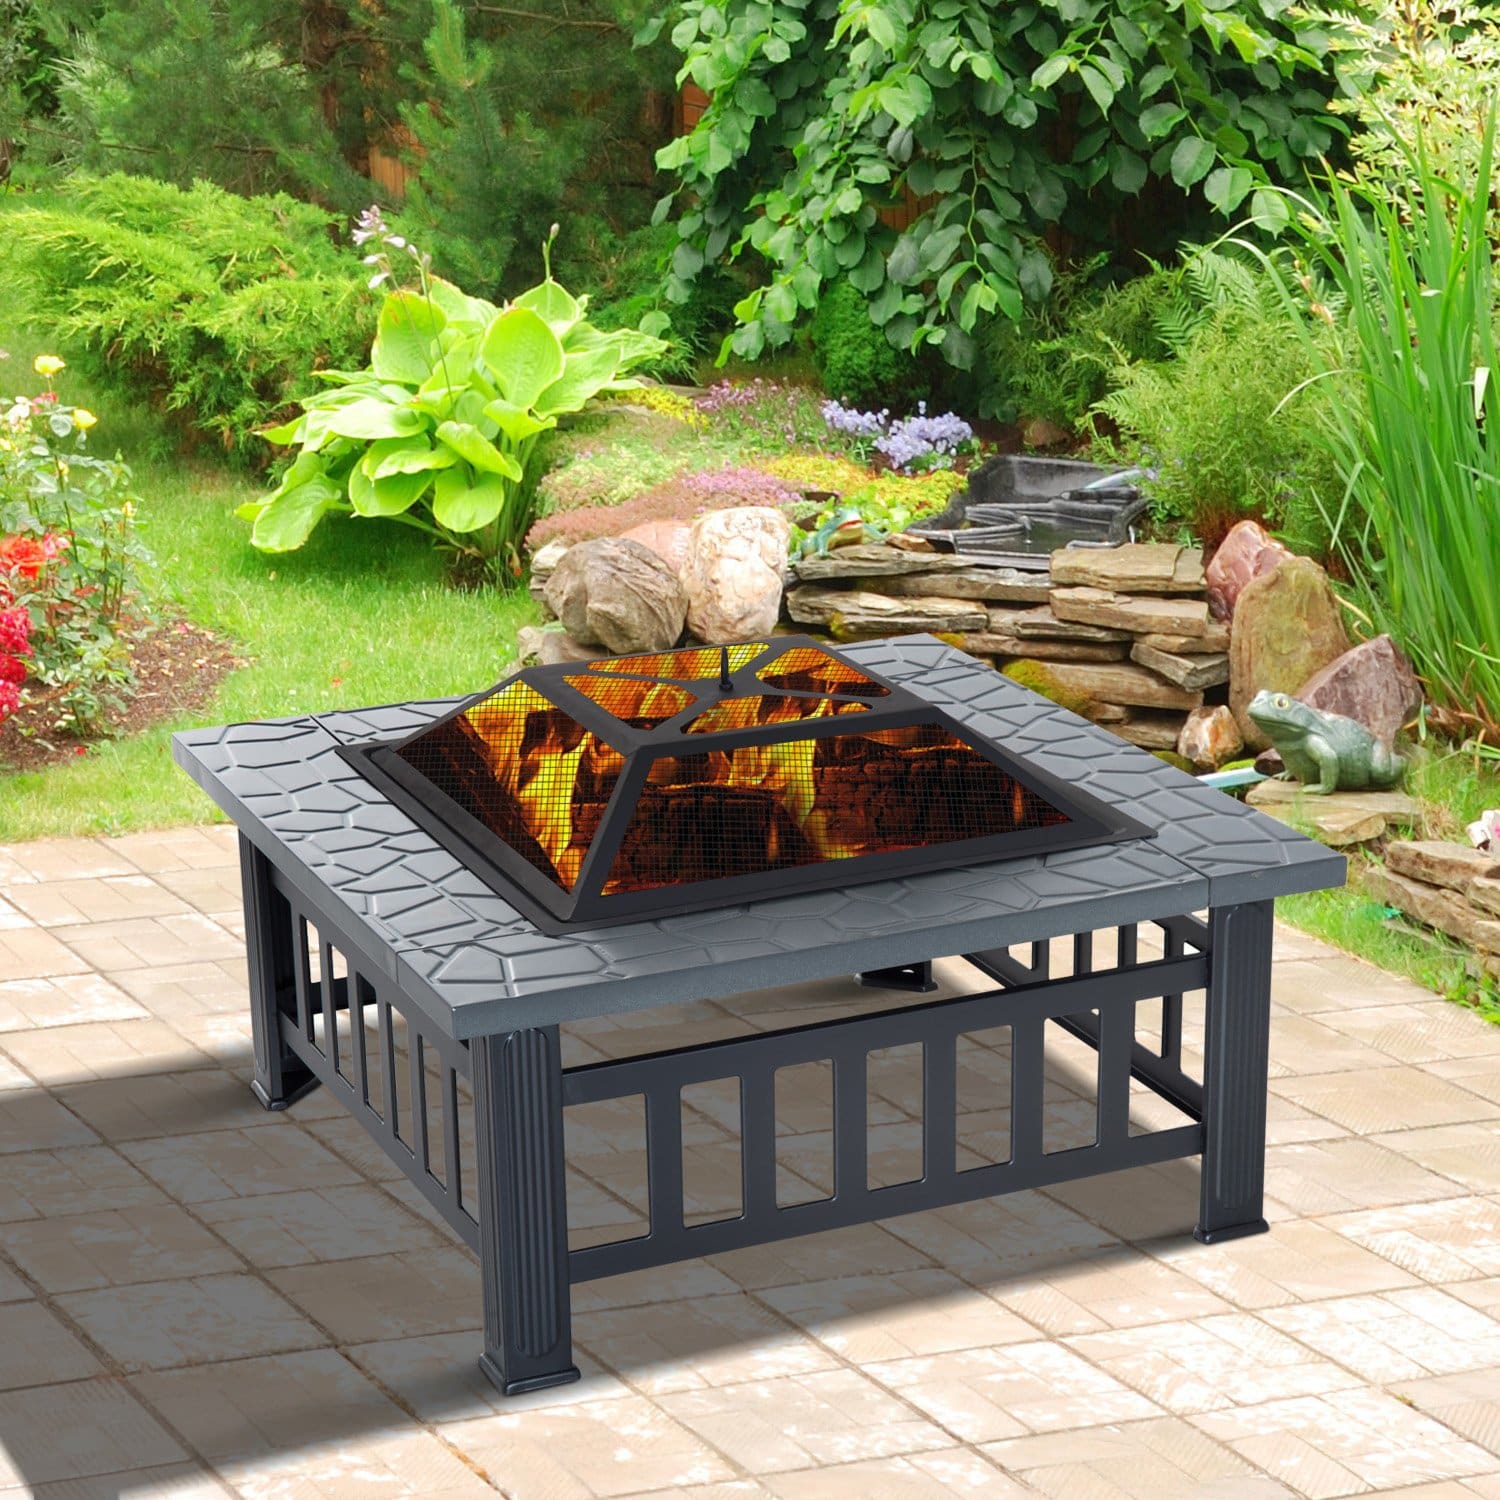 Best Wood Deck Fire Pit: 10 Safe Fire Pits for Wooden Deck Patio 2021